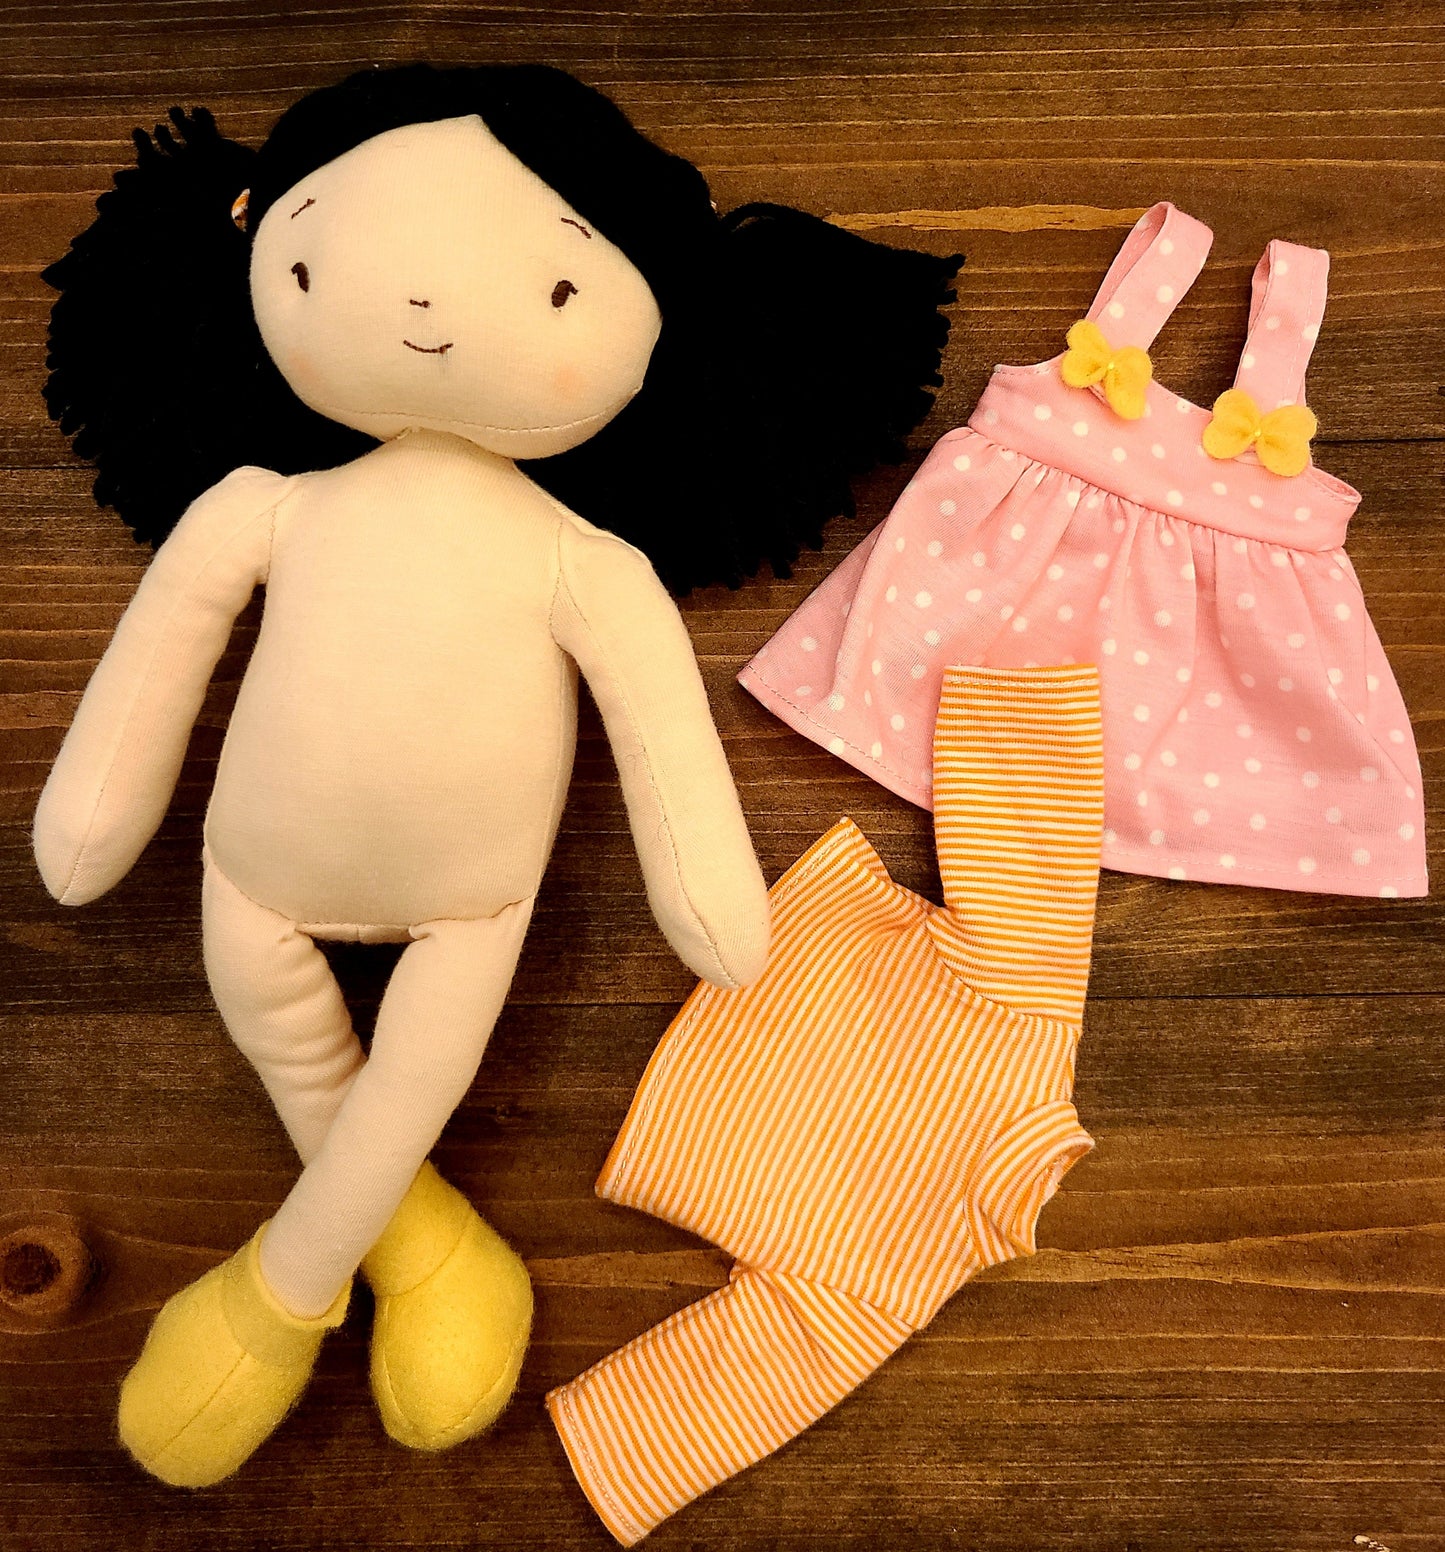 Personalized Soft Rag 12in Pink Polka Dot Dress Girl Plush Doll Toy/Handmade Baby Gift Toy/Global Sister